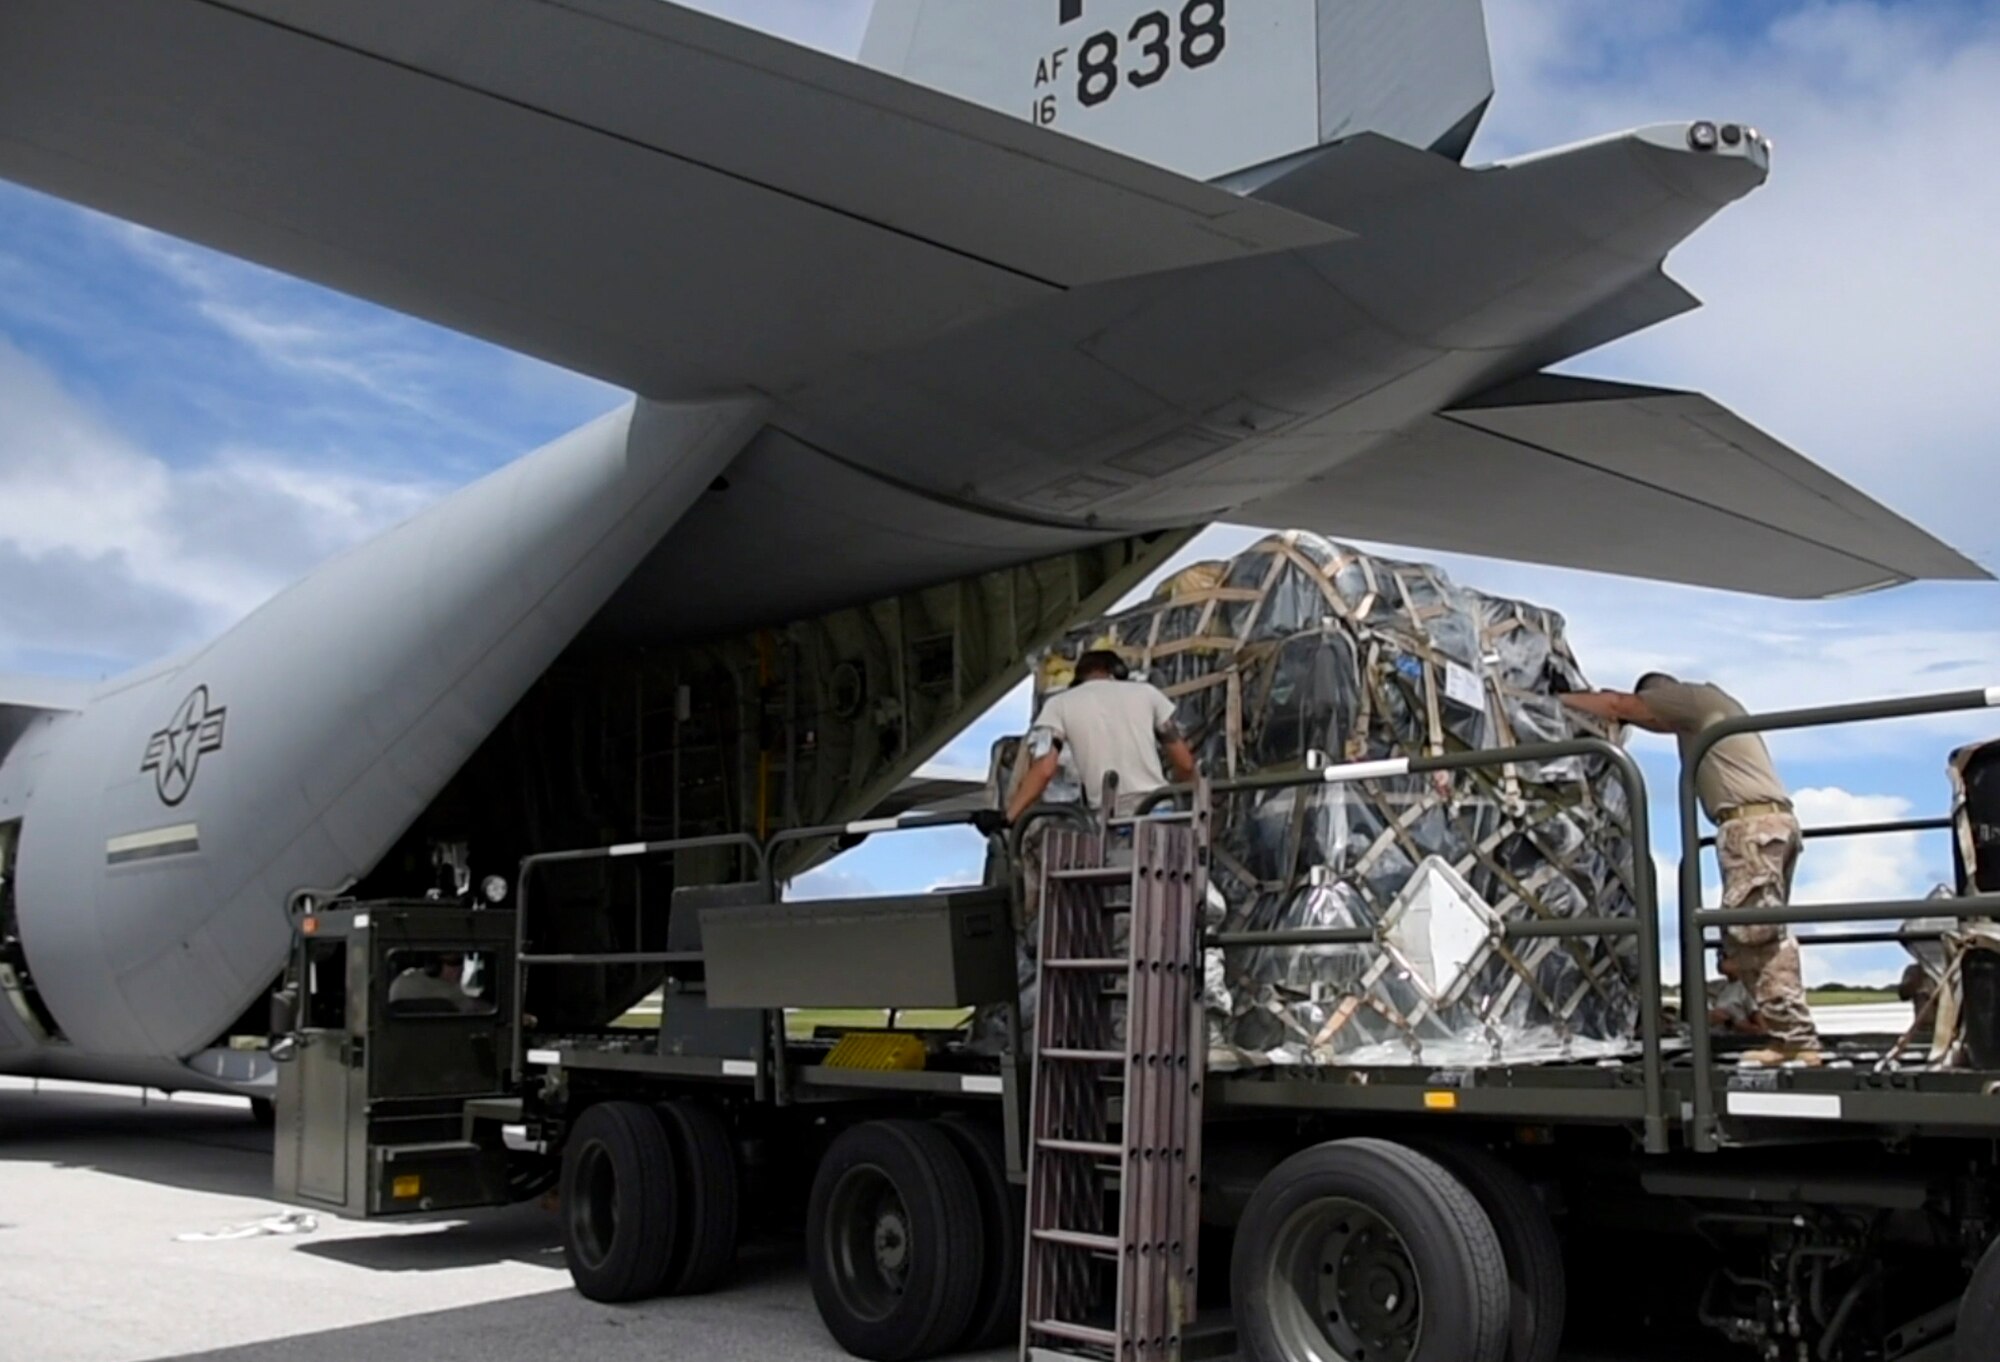 Airmen assigned to the 36th Contingency Response Group load a C-130J Super Hercules Oct. 05, 2018, at Andersen Air Force Base, Guam. United States Indo-Pacific Command is deploying as part of the broader U.S. Government effort to support Indonesia's request for humanitarian assistance.  This effort includes coordination with the U.S. Department of State and U.S. Agency for International Development, in constant consultation with Indonesian authorities. (U.S. Air Force photo by Senior Airman Gerald R. Willis)